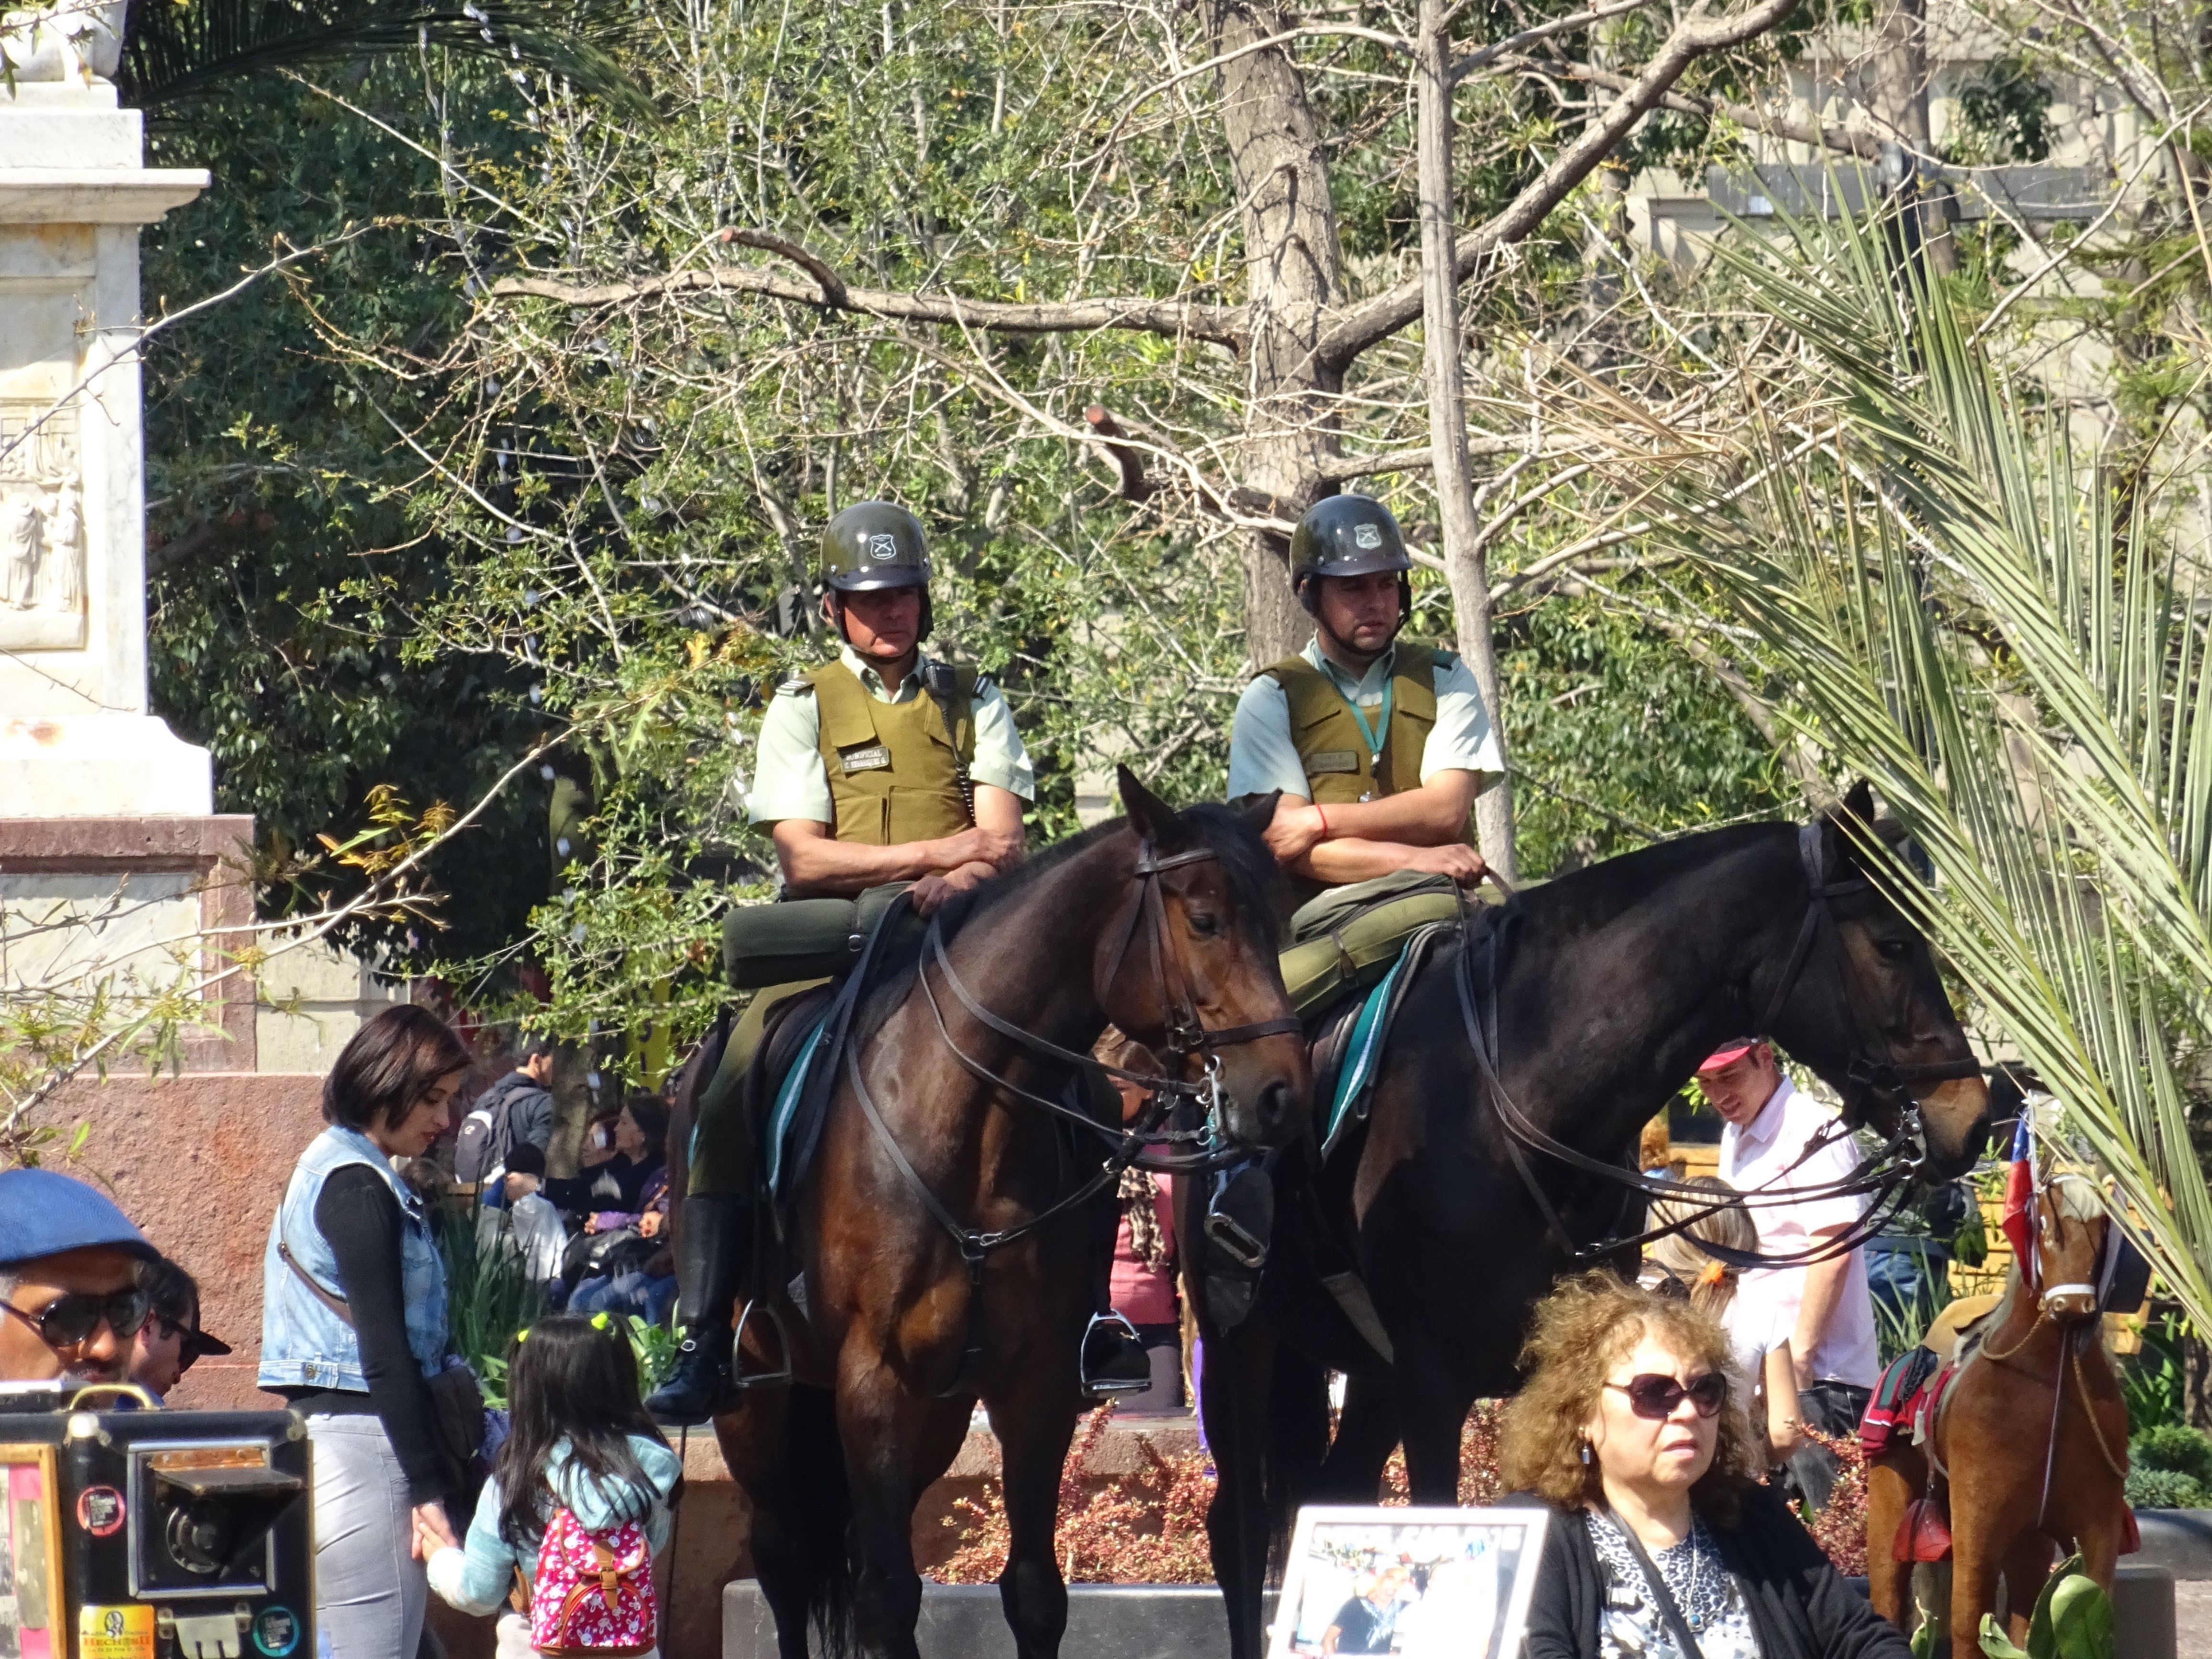 Police on the horses